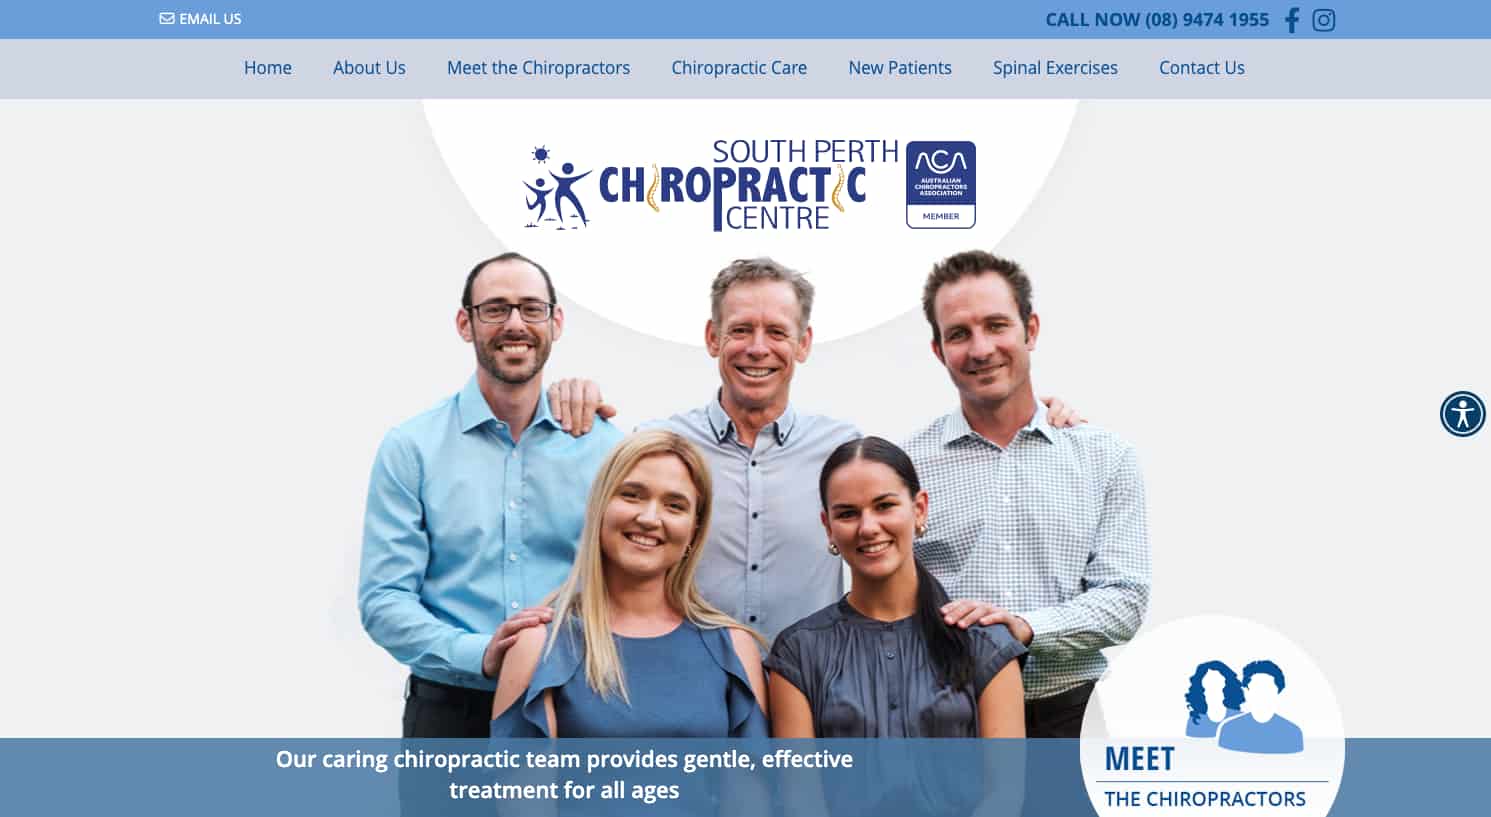 South Perth Chiropractic Centre